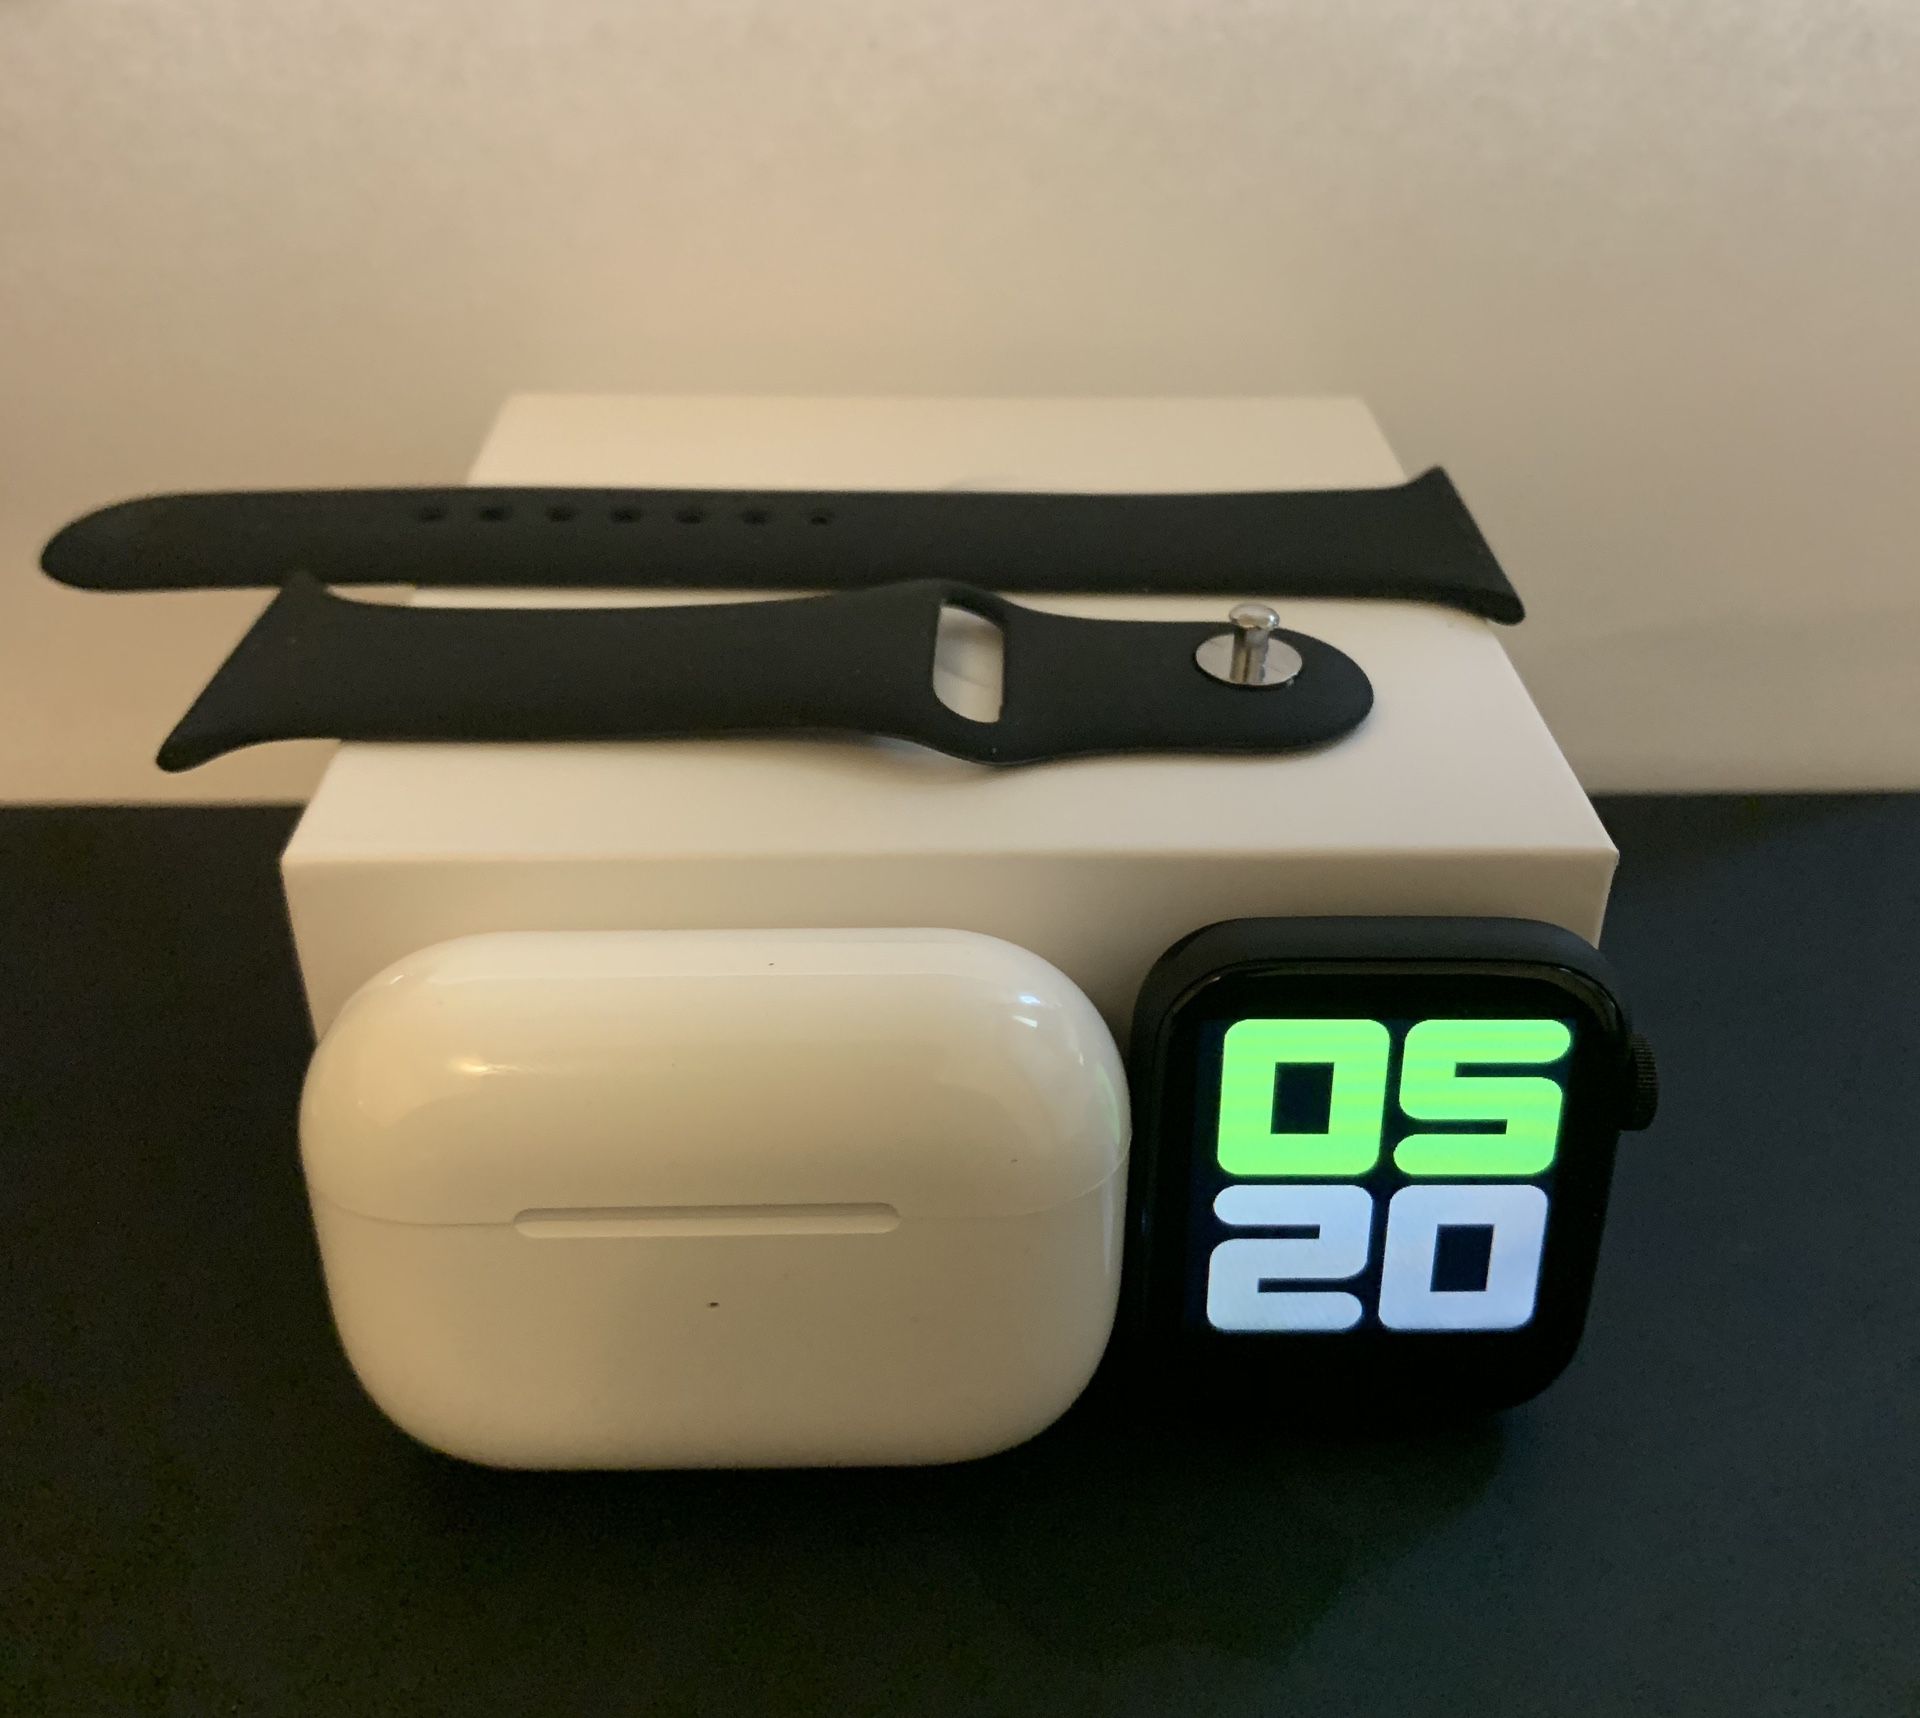 Wireless earbuds and smartwatch bundle